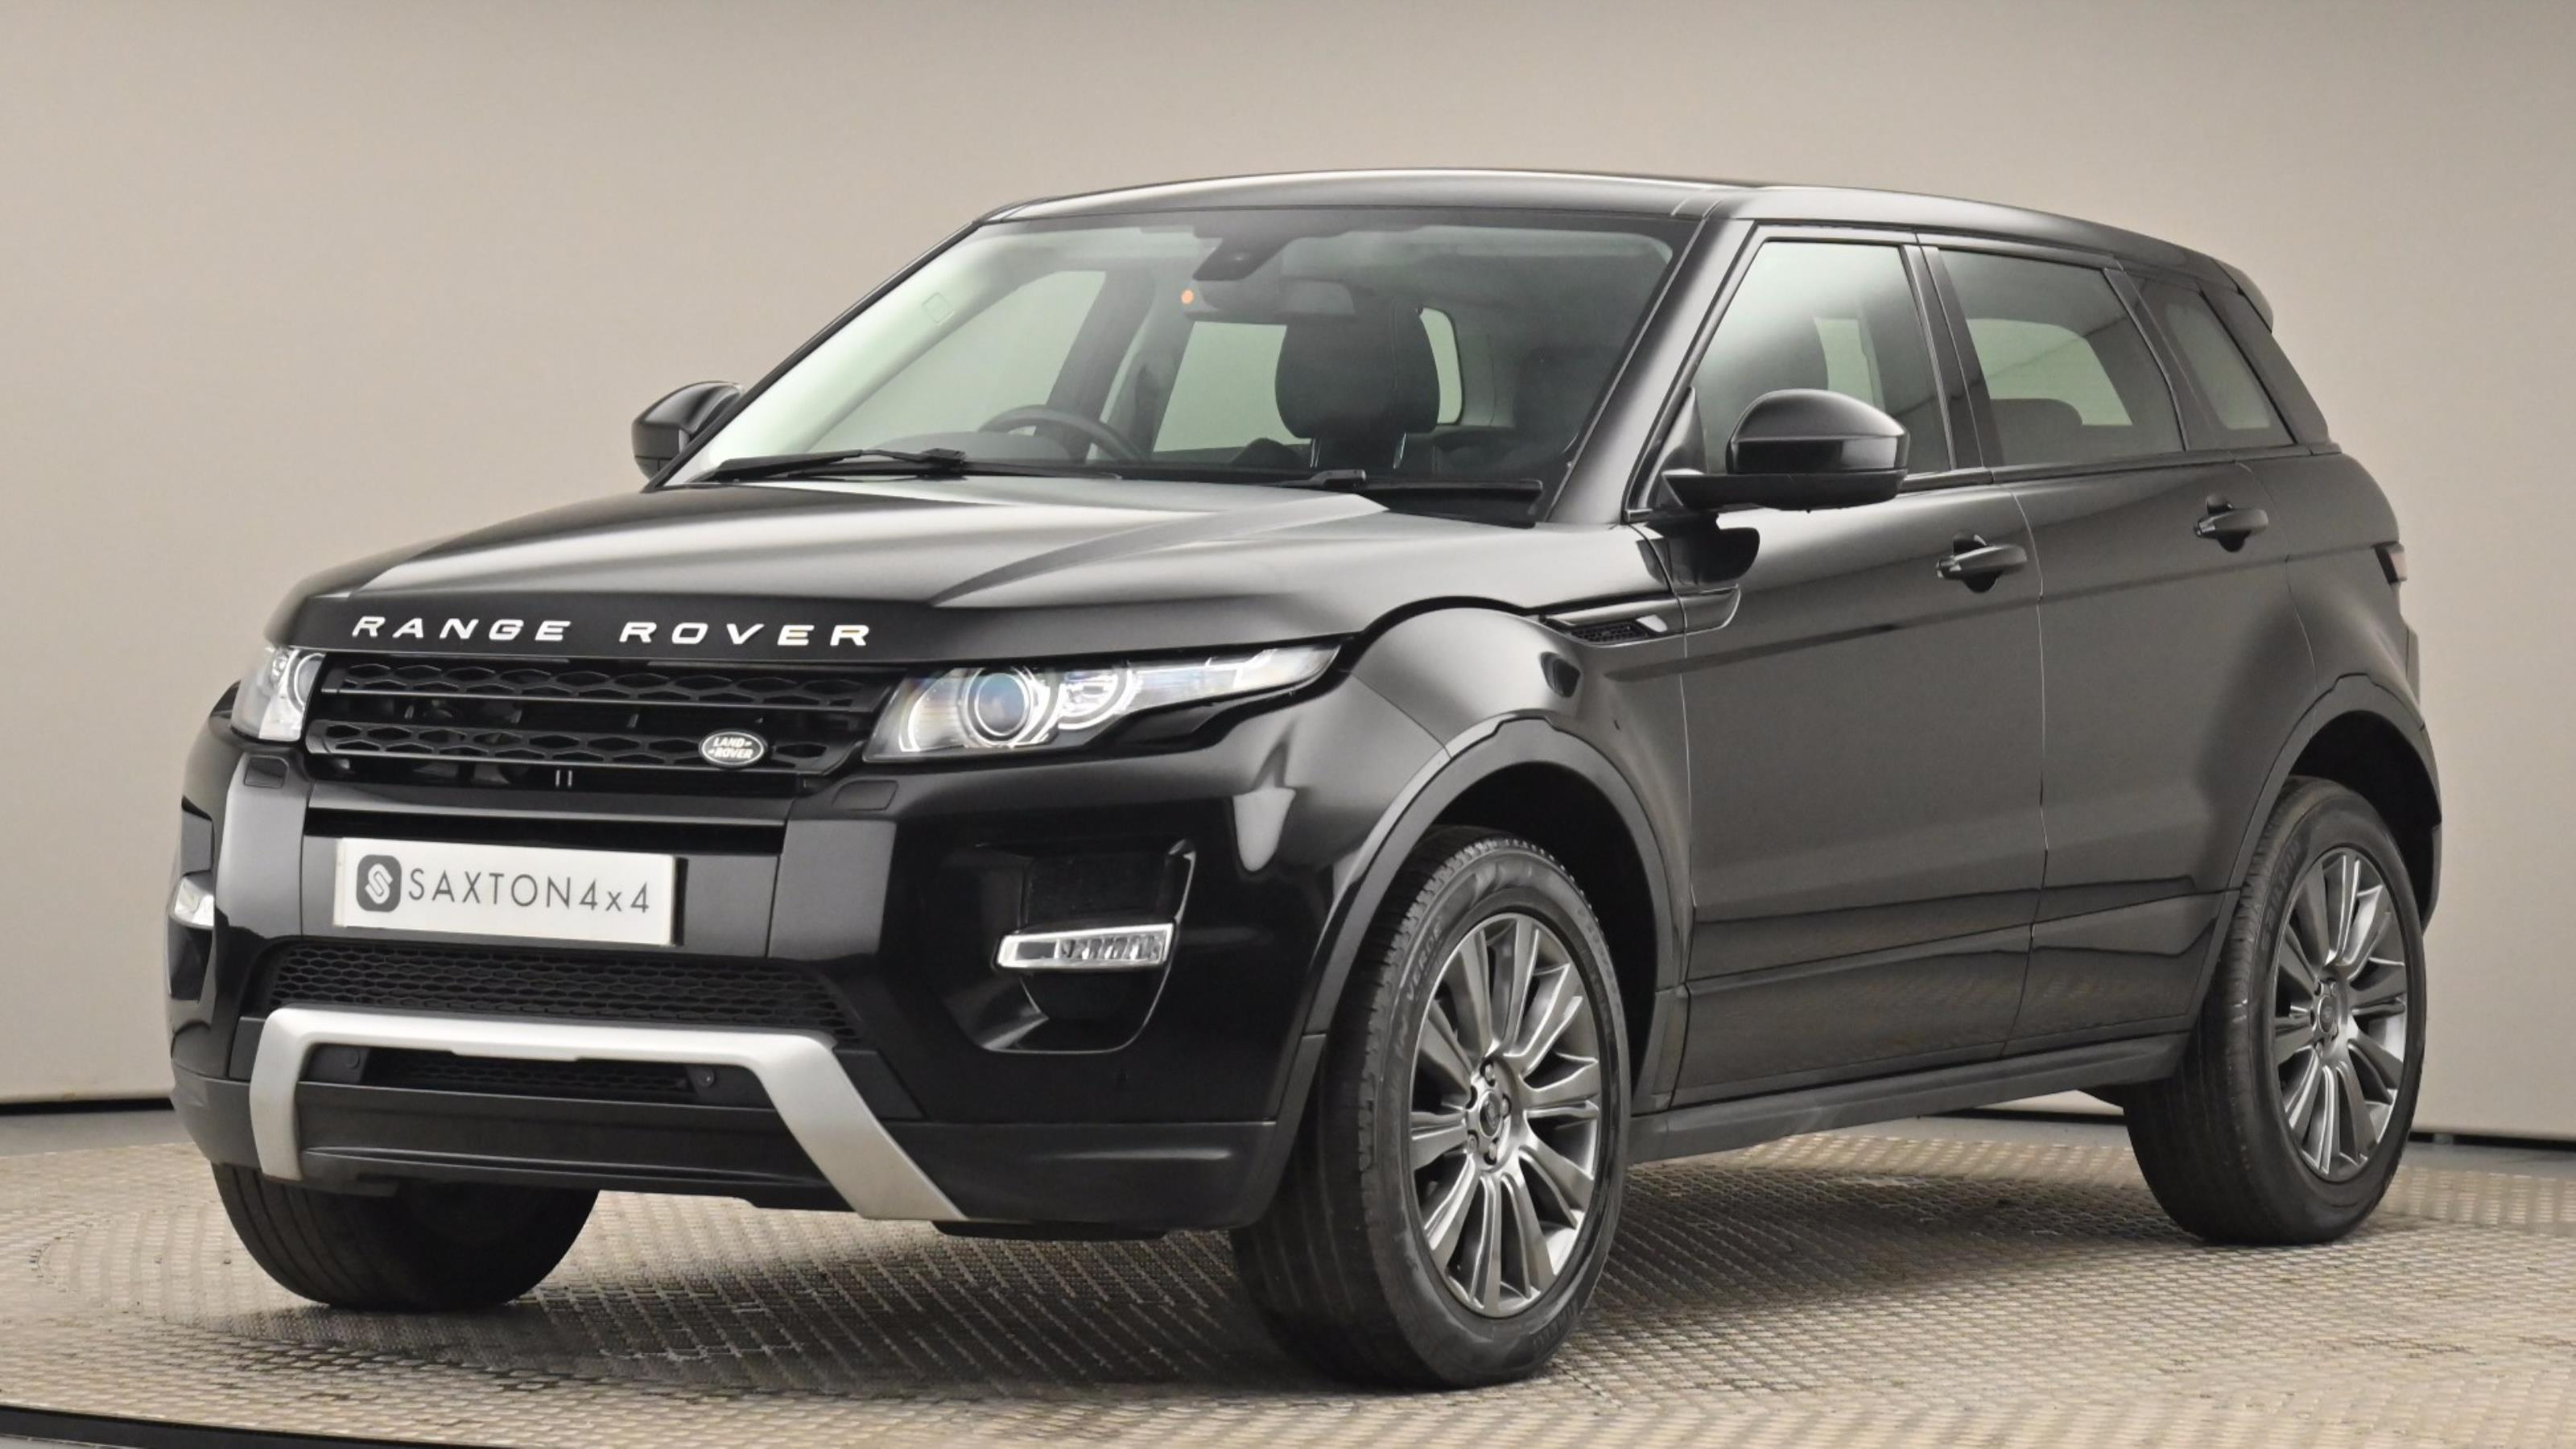 Used 2015 Land Rover Range Rover Evoque 22 Sd4 Dynamic 5dr Auto 9